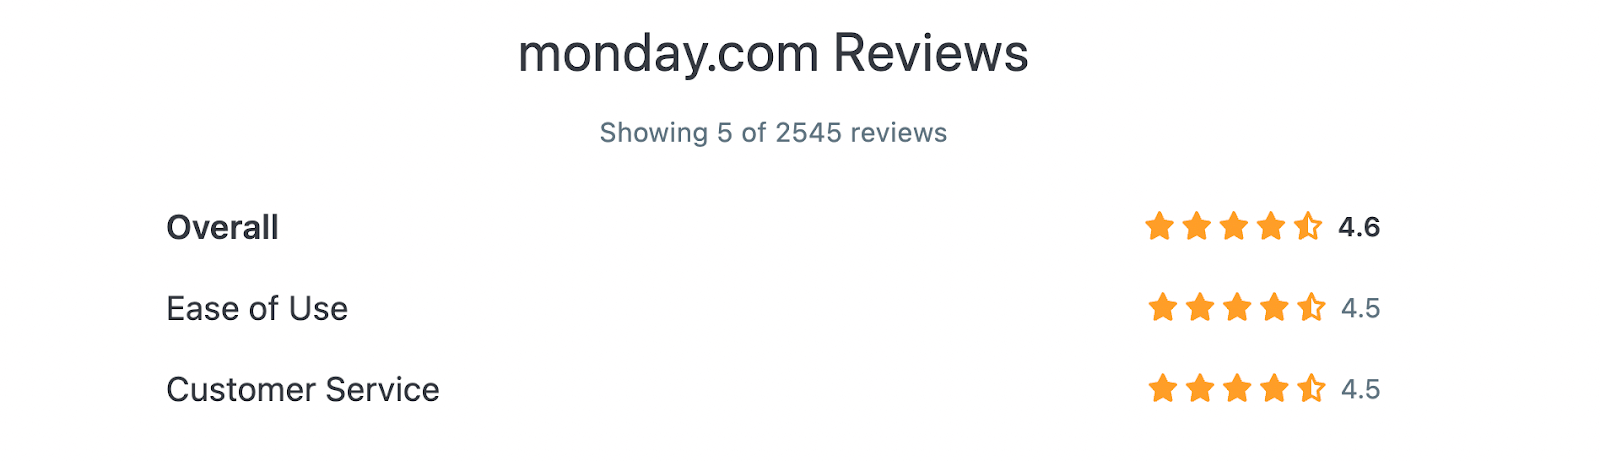 monday.com reviews on Capterra (Overall: 4.6, Ease of Use: 4.5, Customer Service: 4.5)